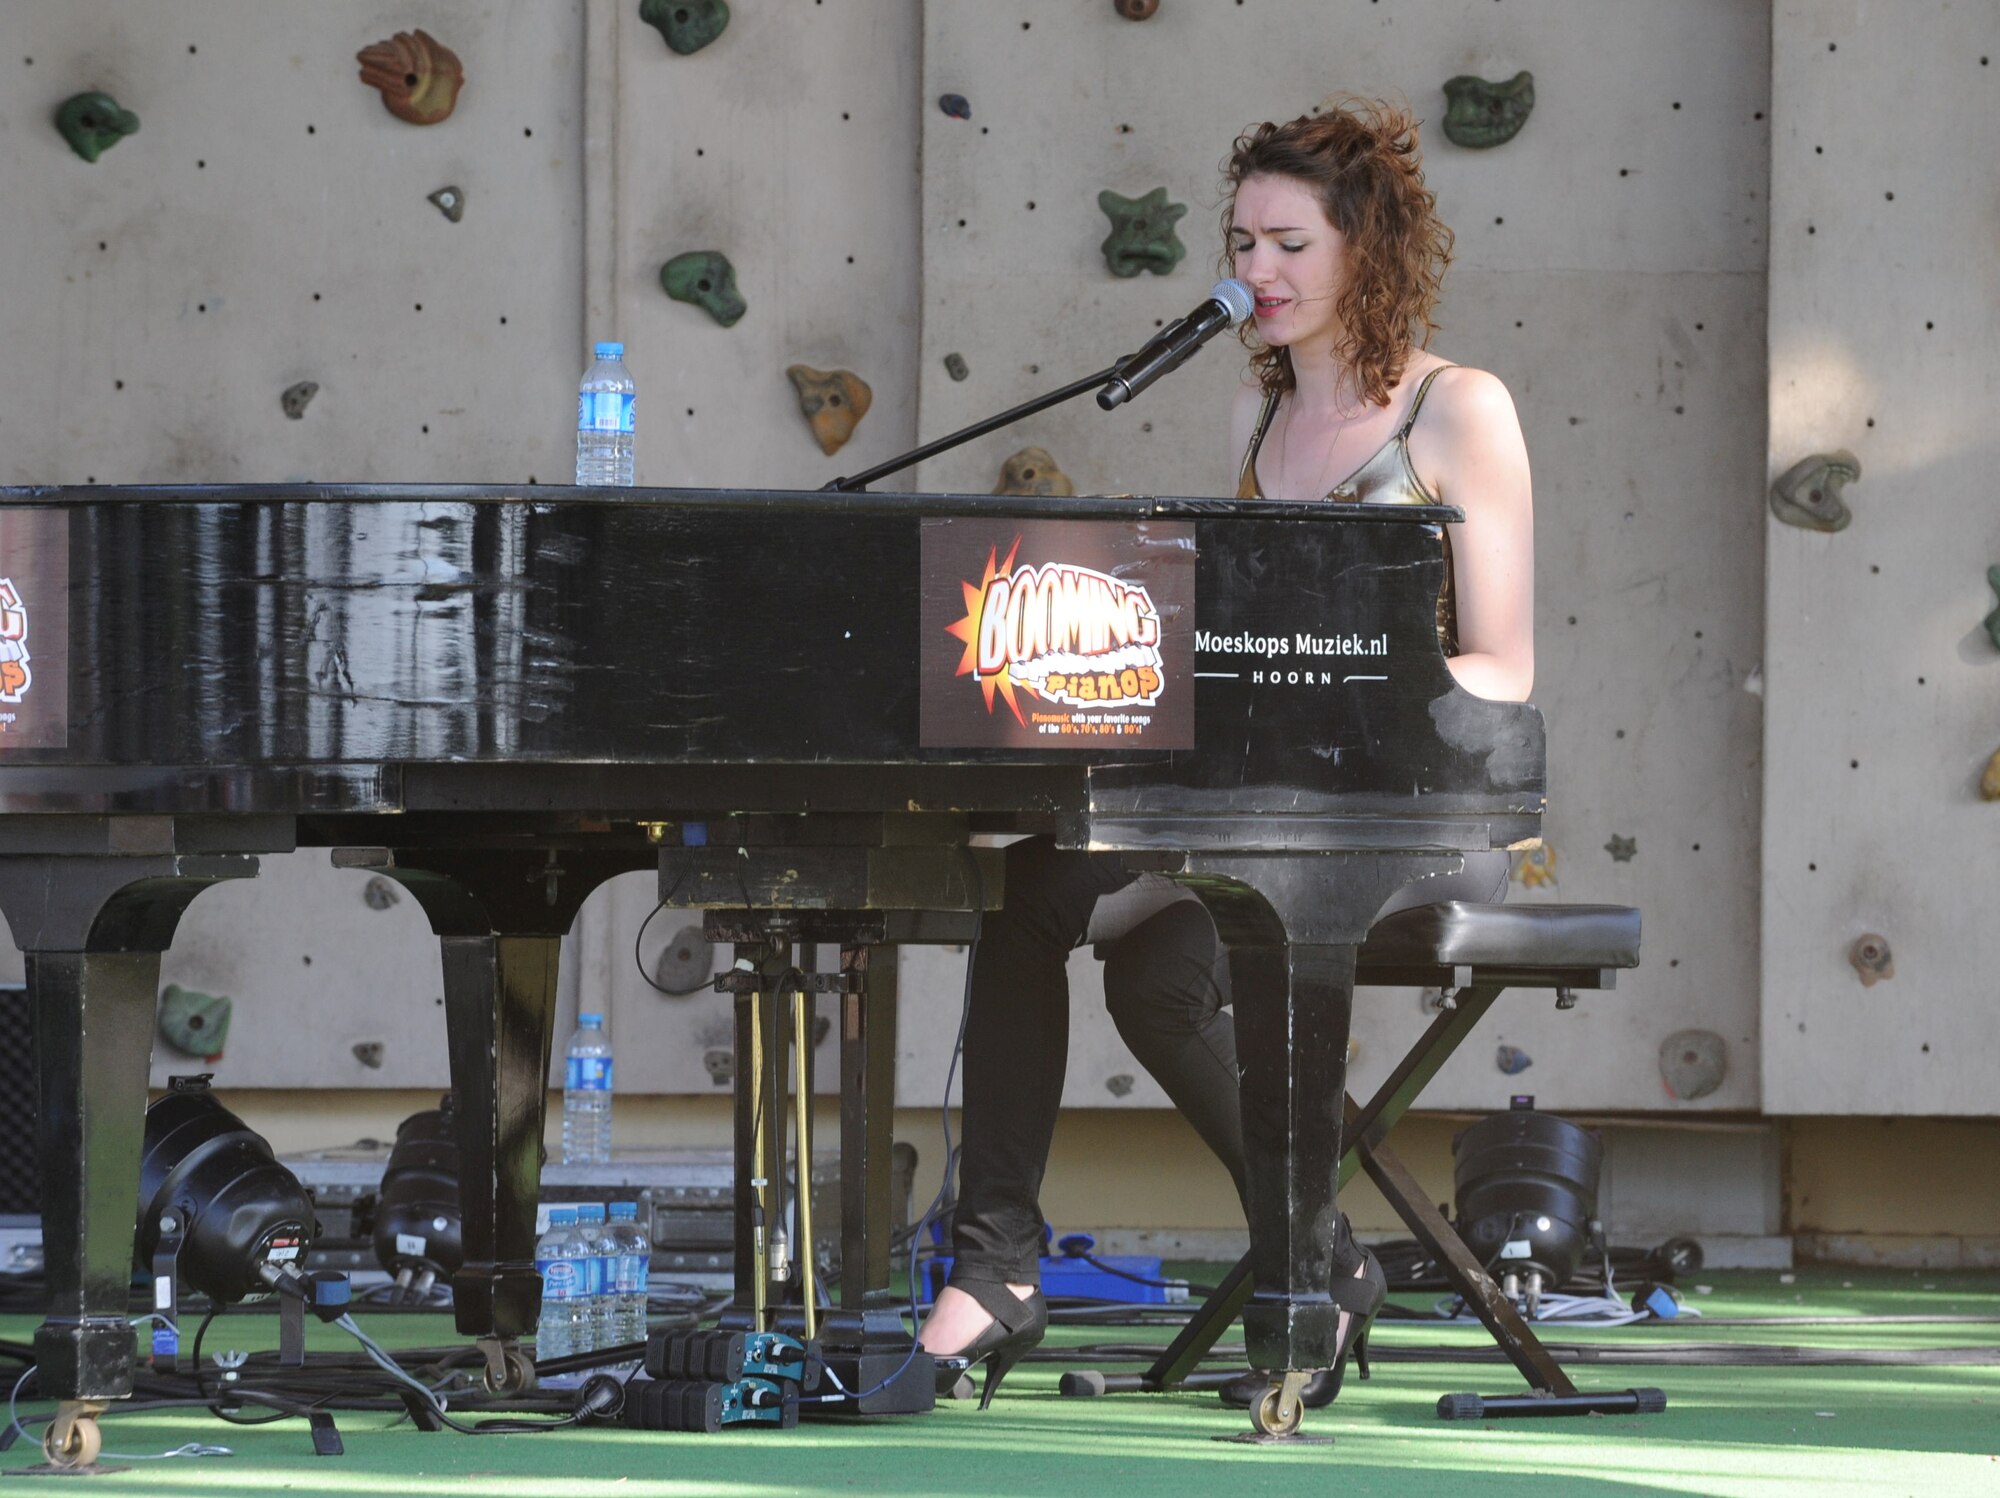 One of three singers and piano players from the music group Booming Pianos performs live at the Dutch Army-hosted Koninginnedag, or Queen’s Day,  celebration held at Arkadas Park April 25, 2013, Incirlik Air Base, Turkey. Koninginnedag is a Dutch national holiday that is observed April 30. The Dutch soldiers are deployed to Incirlik Air Base as part of a NATO-led operation to boost Turkey’s air defense capabilities by providing Patriot missile batteries. (U.S. Air Force photo by 1st Lt. David Liapis/Released)